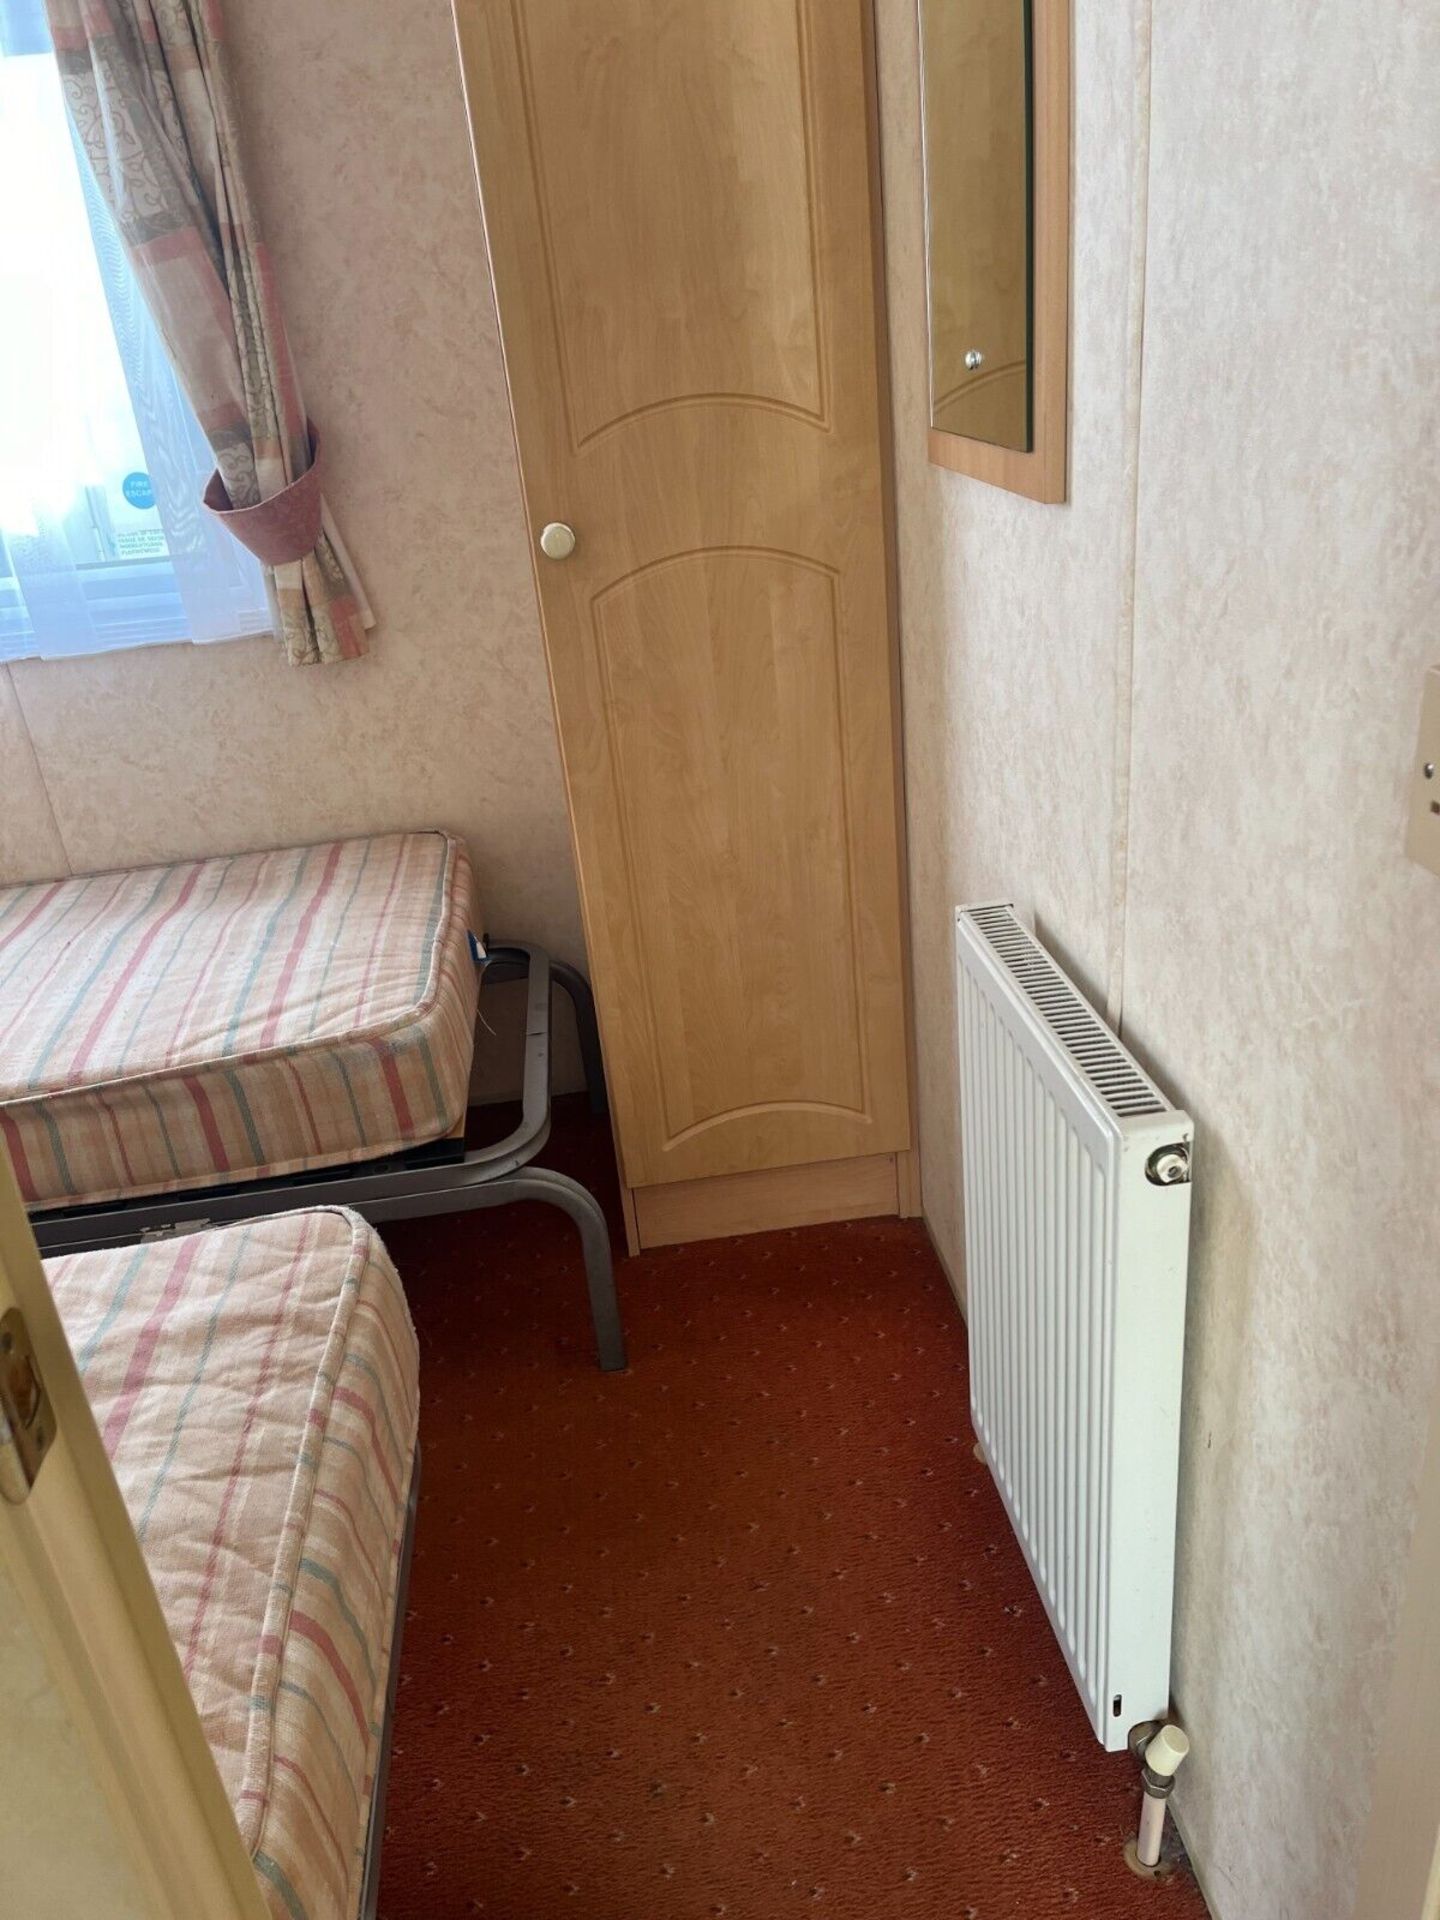 UPGRADE POTENTIAL: WILLERBY WESTMOORLAND OFF-SITE SALE - Image 7 of 17